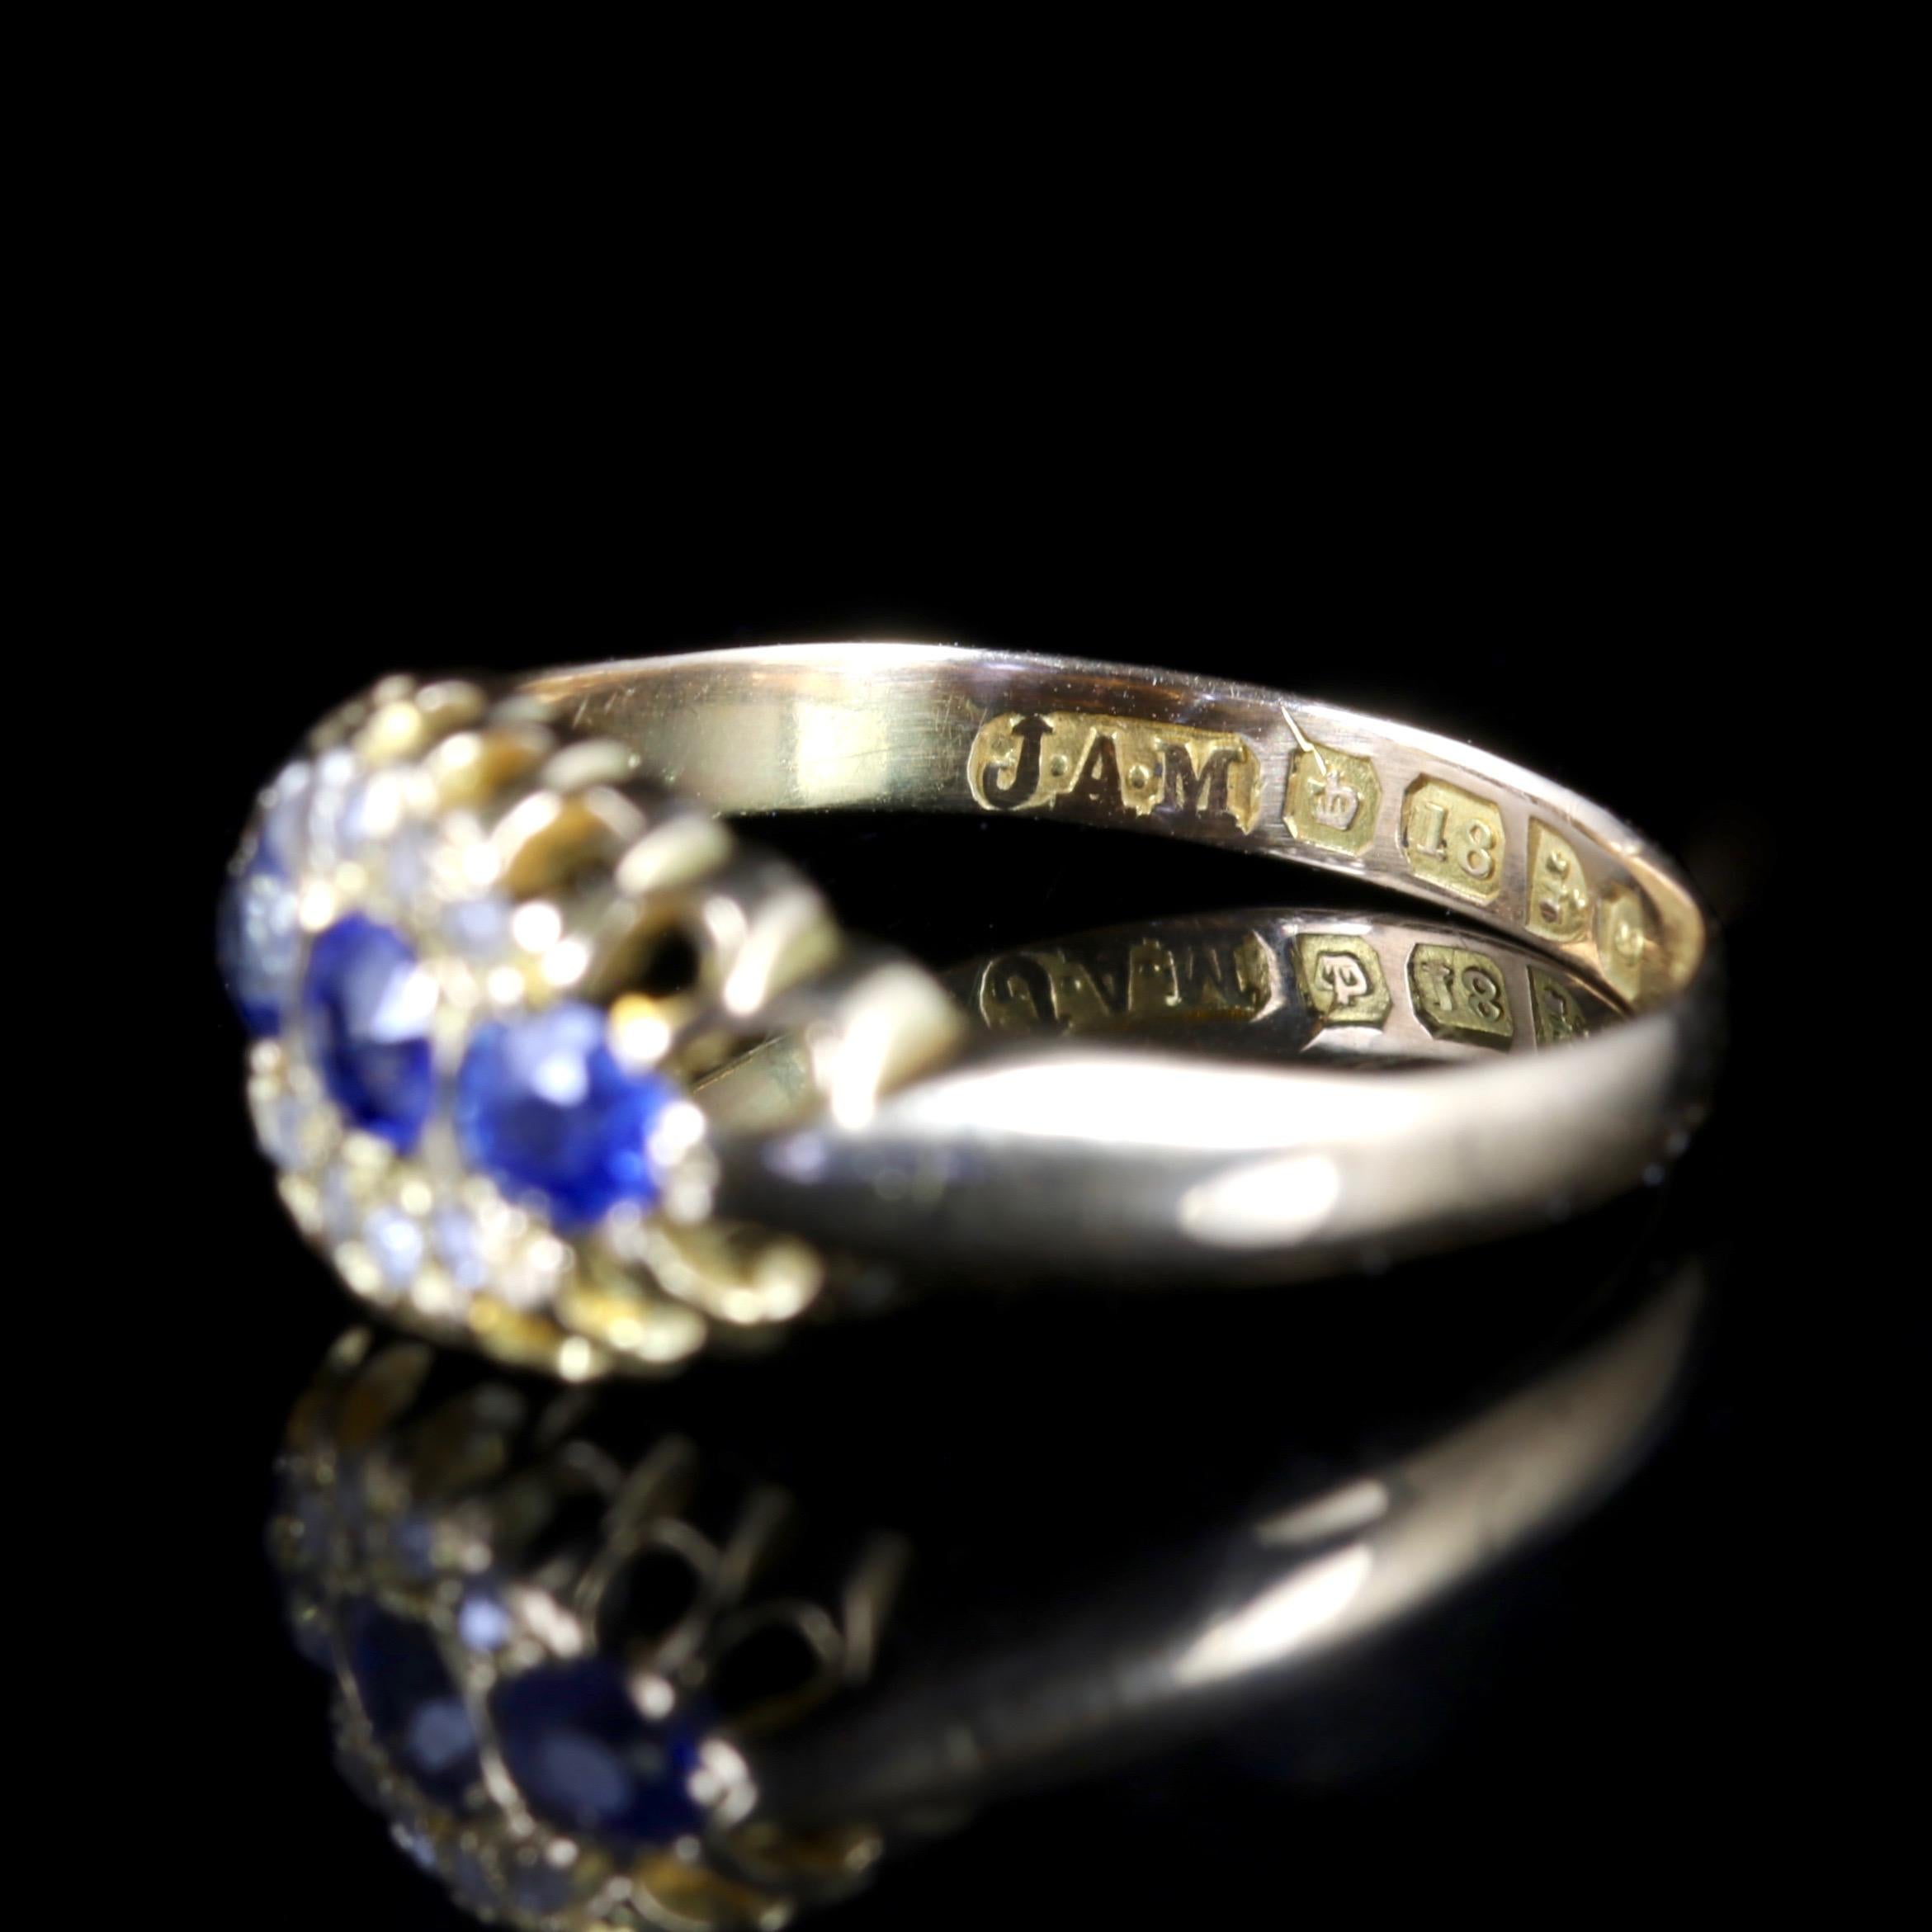 Antique Edwardian Sapphire Diamond Ring 18 Carat Dated Chester, 1903 For Sale 1